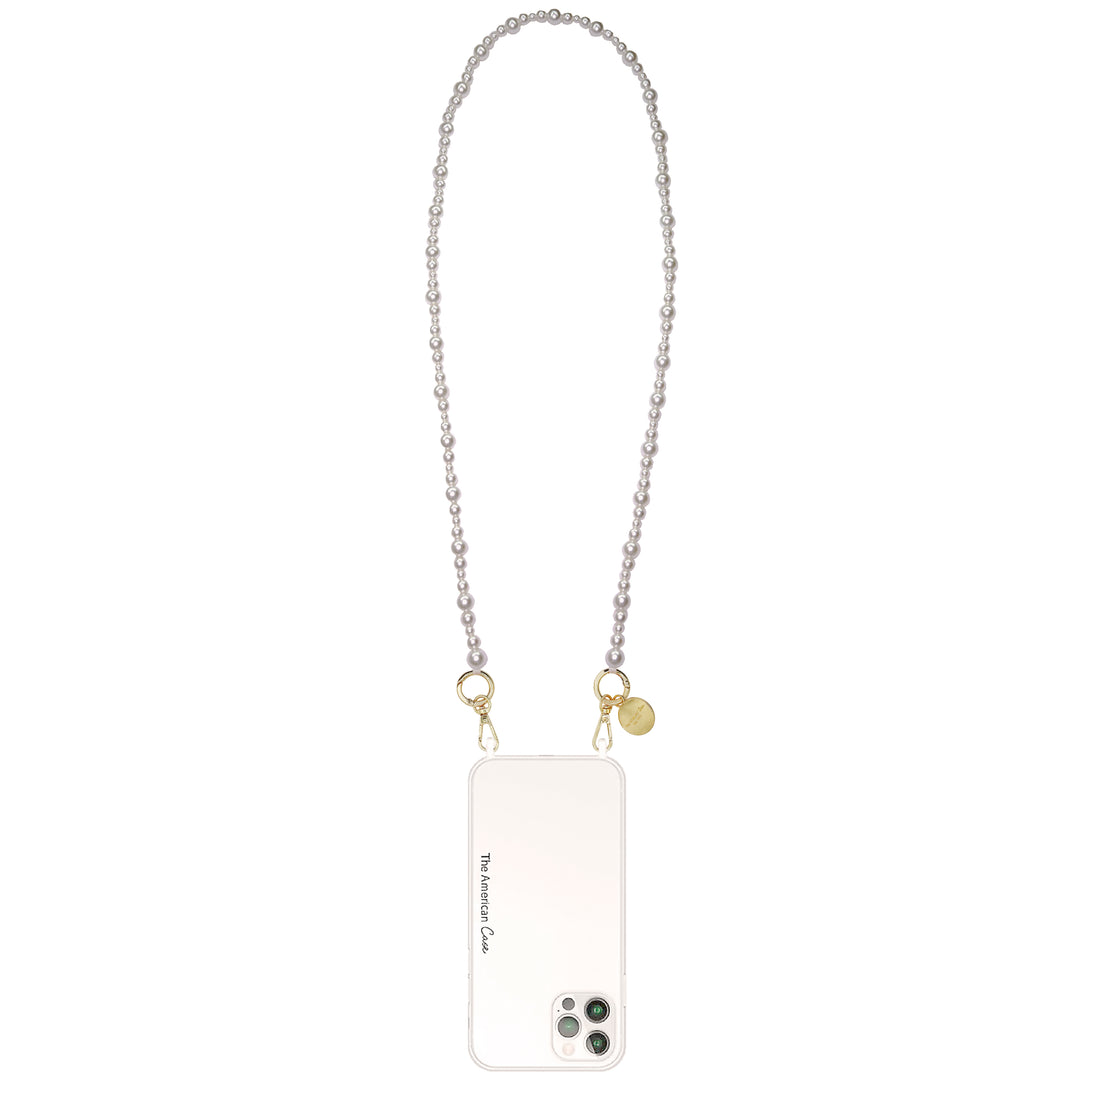 Anya- Multi-Sized White Pearl Crossbody Chain with Golden Carabiners